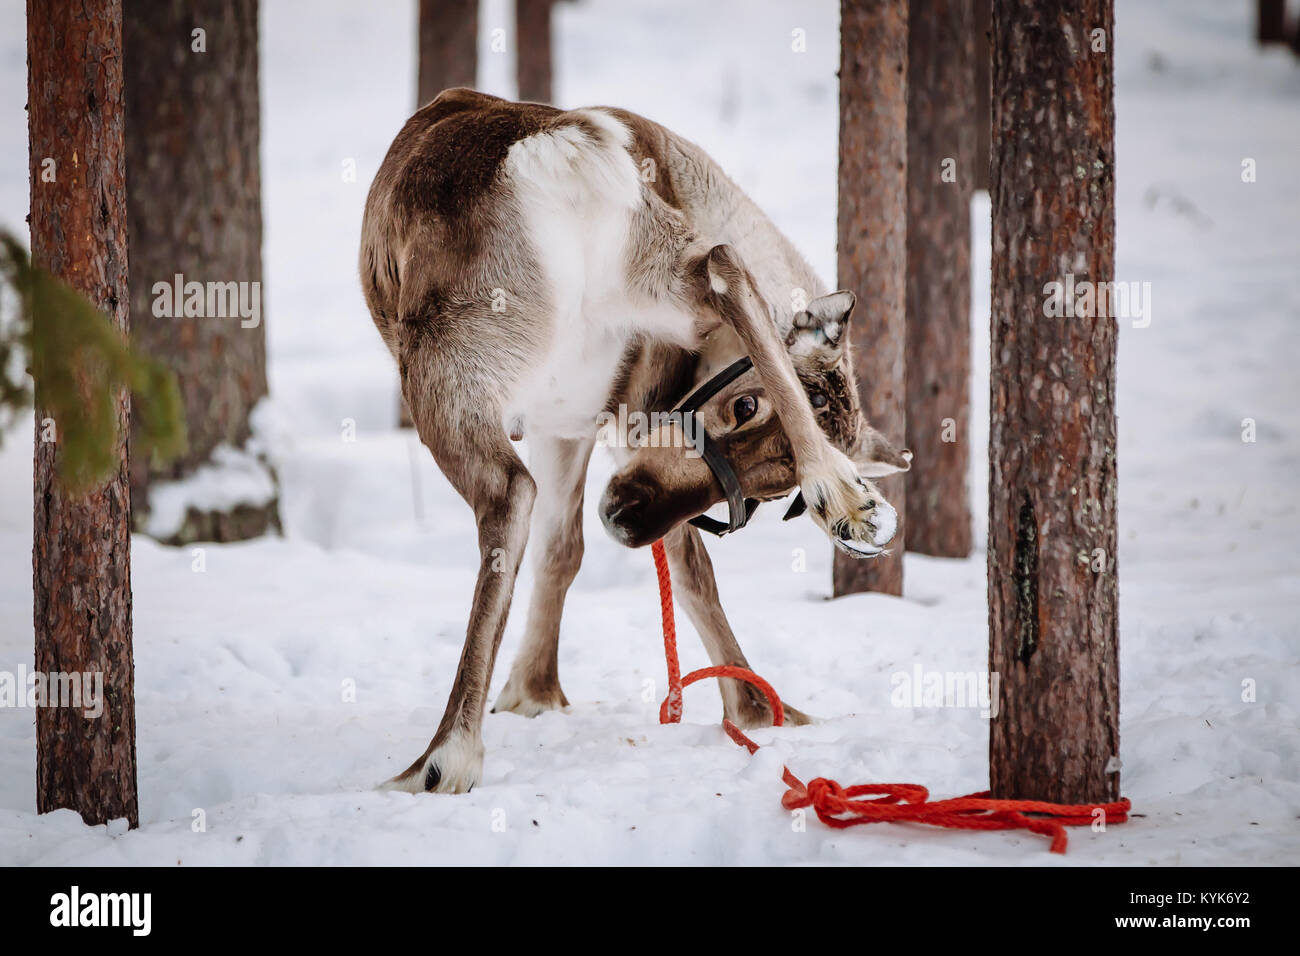 Reindeer is one of the symbols of Finnish Lapland. Levi. Stock Photo